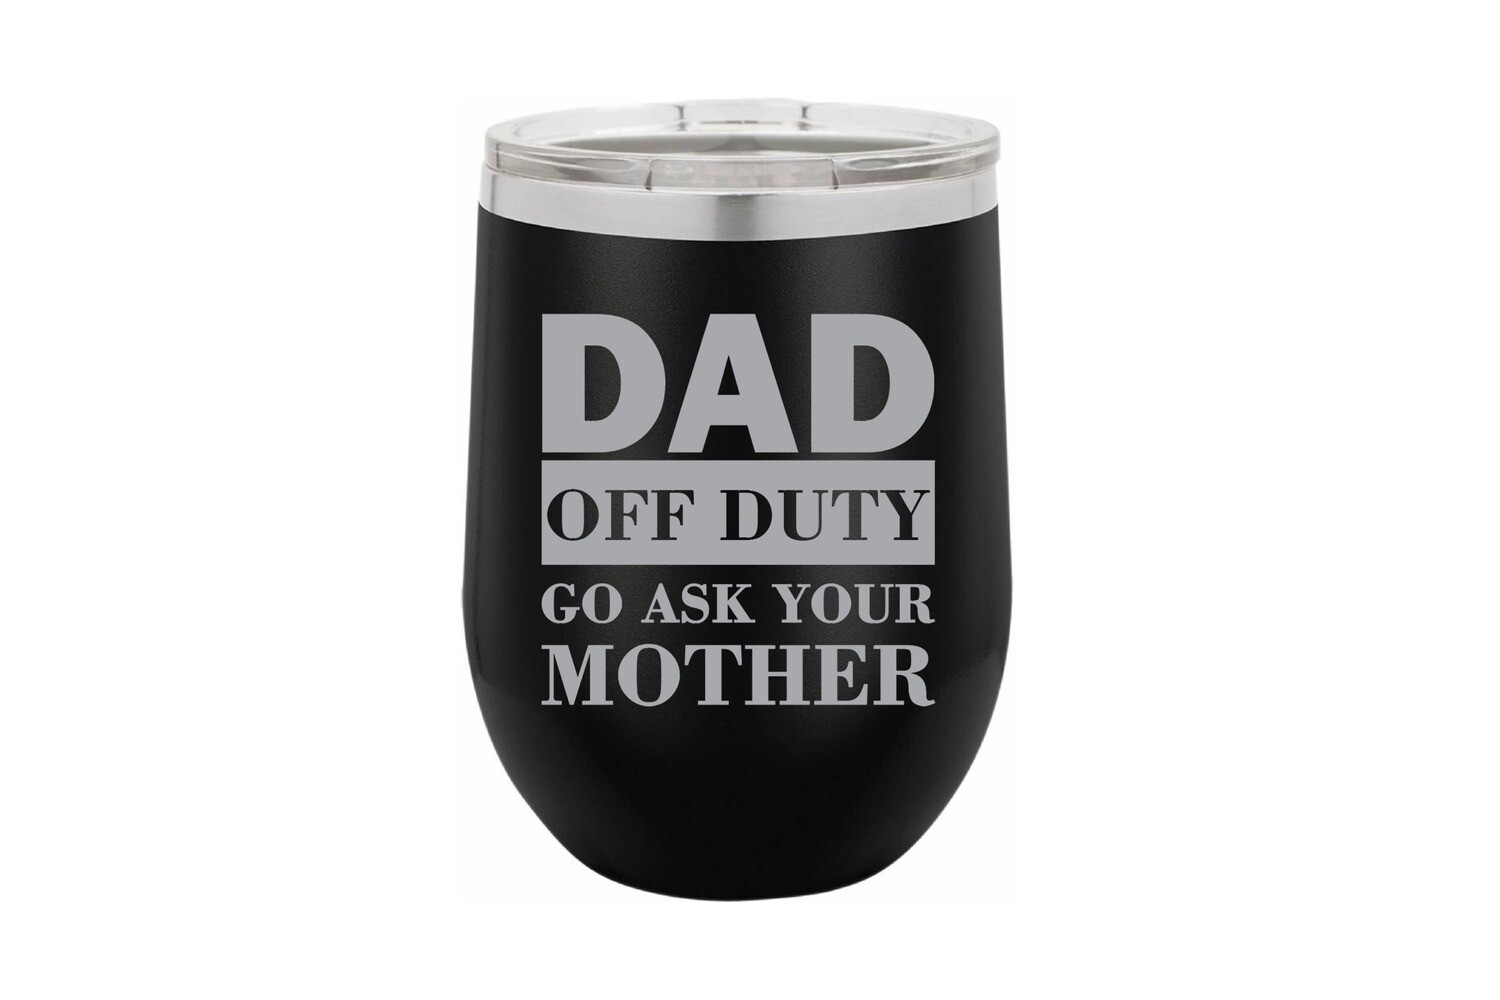 DAD OFF DUTY go ask your mother Insulated Tumbler 12 oz